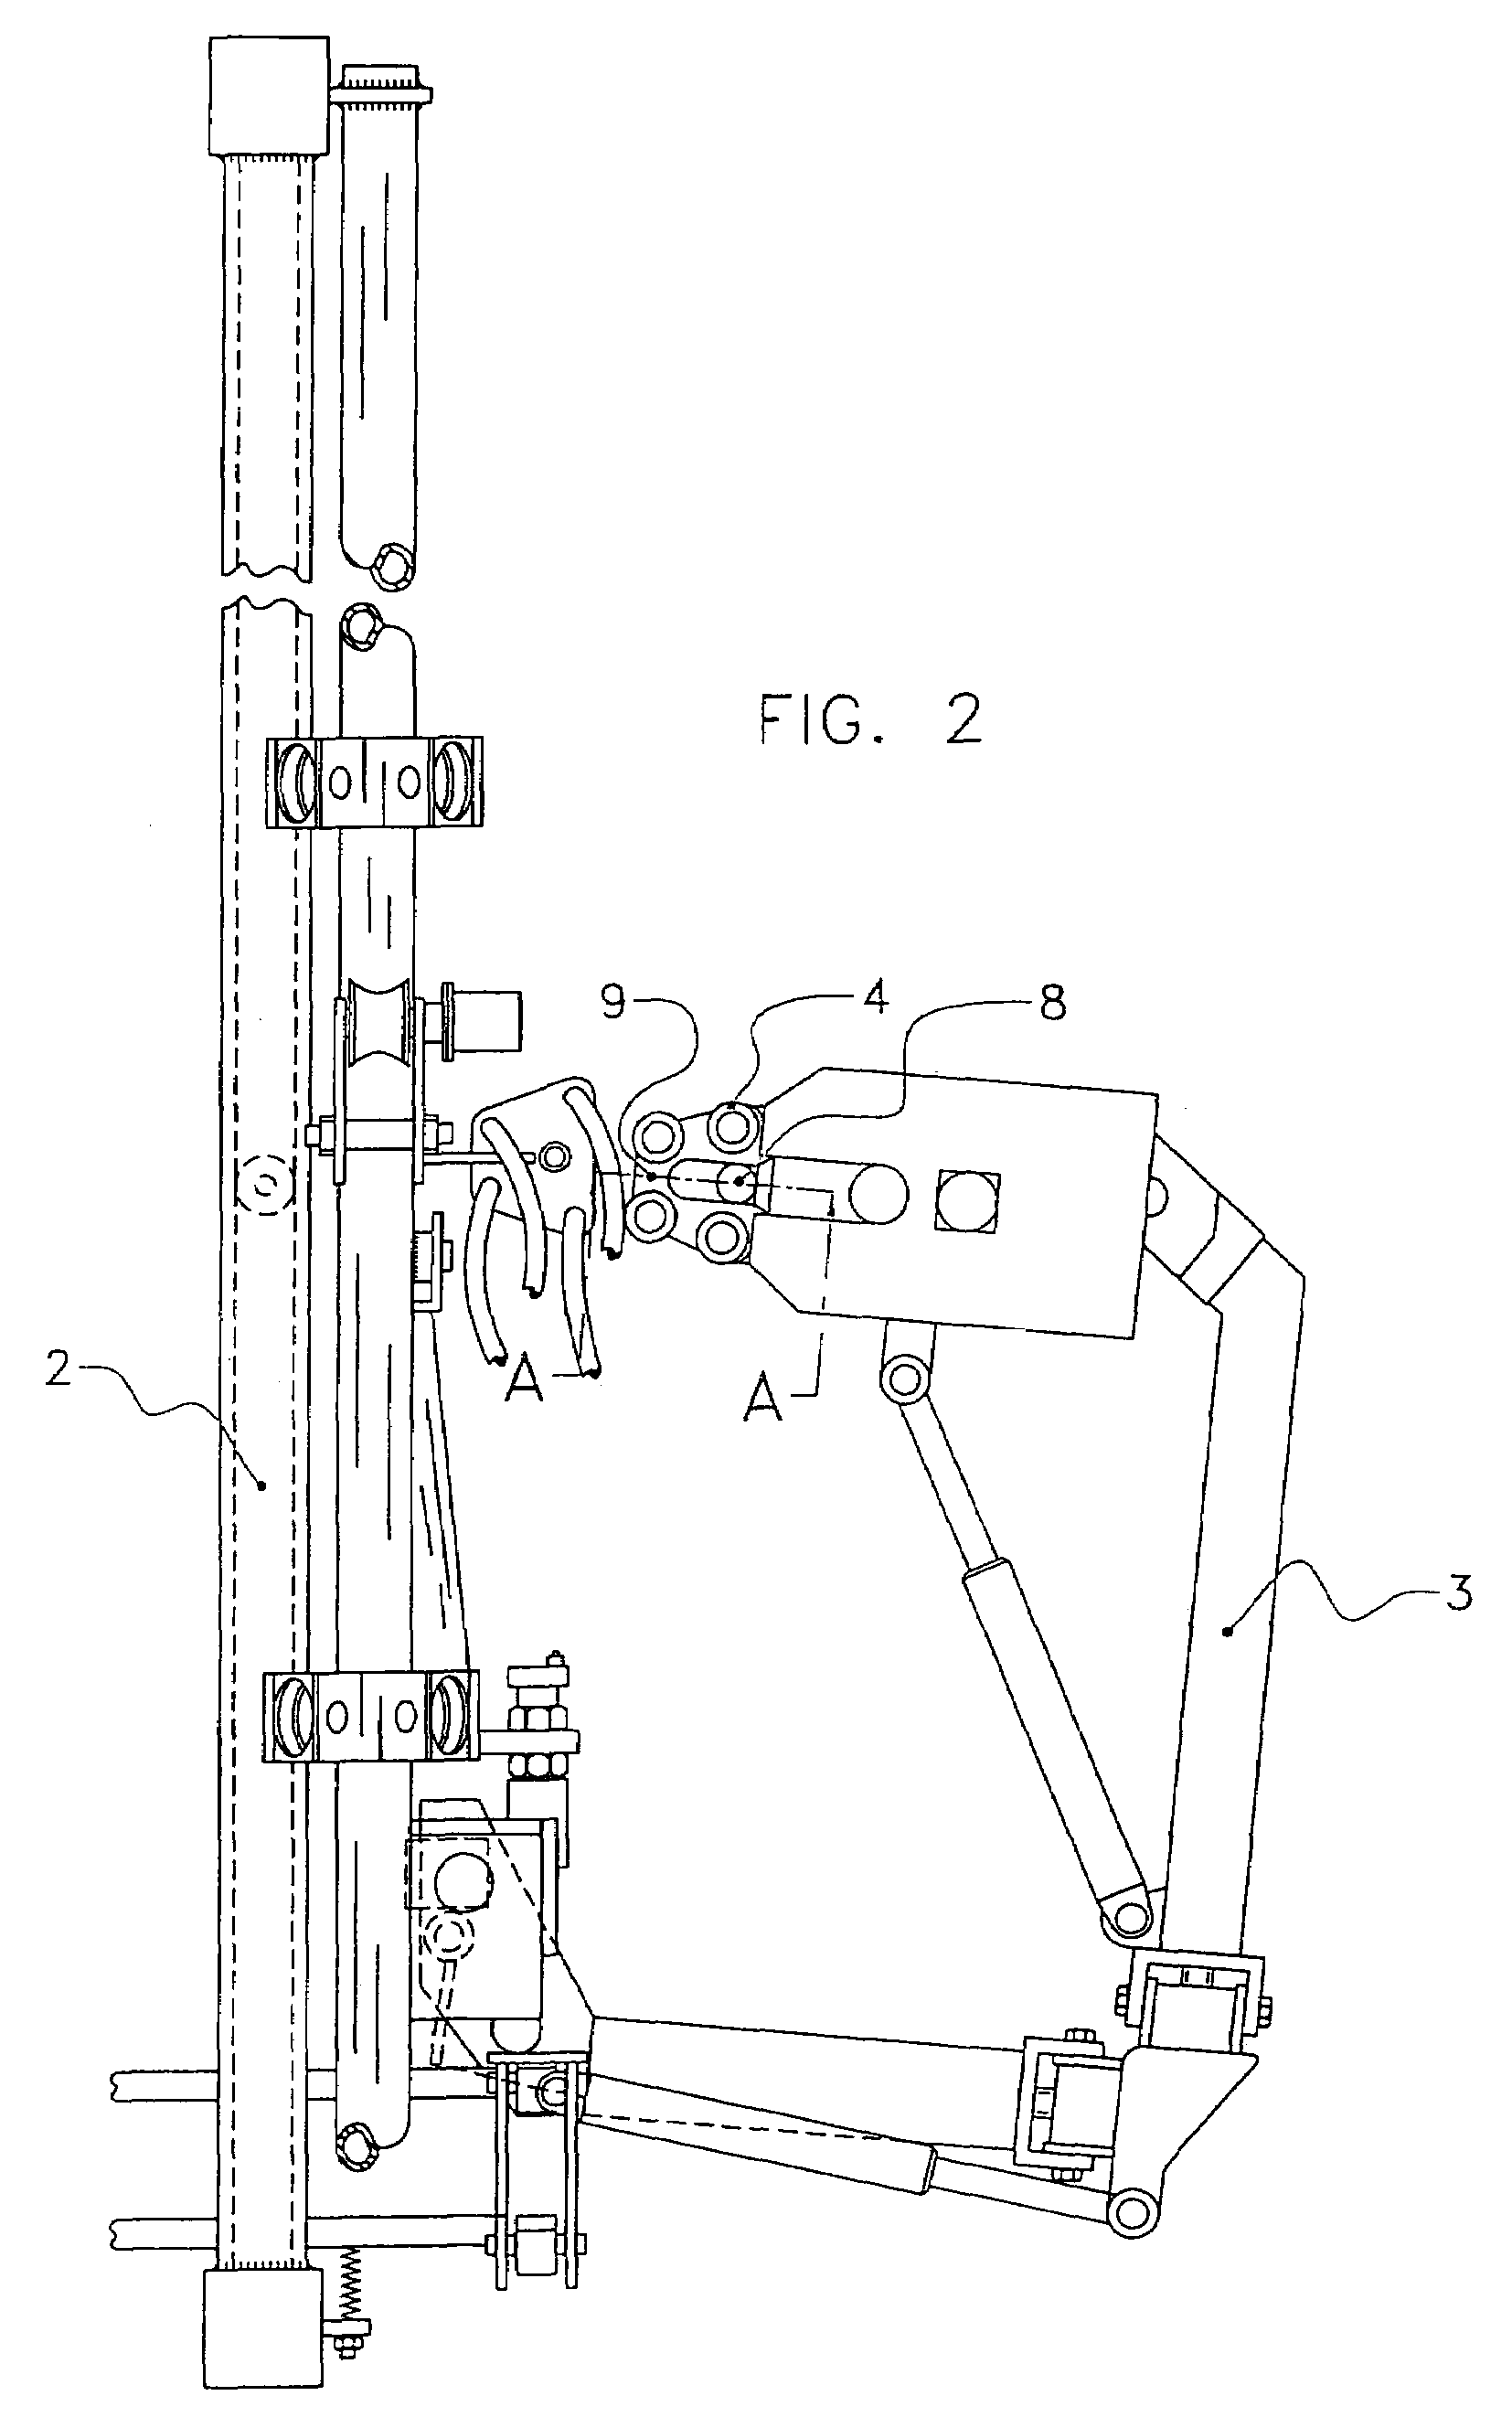 Fluid-applying device and a method of applying a fluid to a teat of a dairy animal